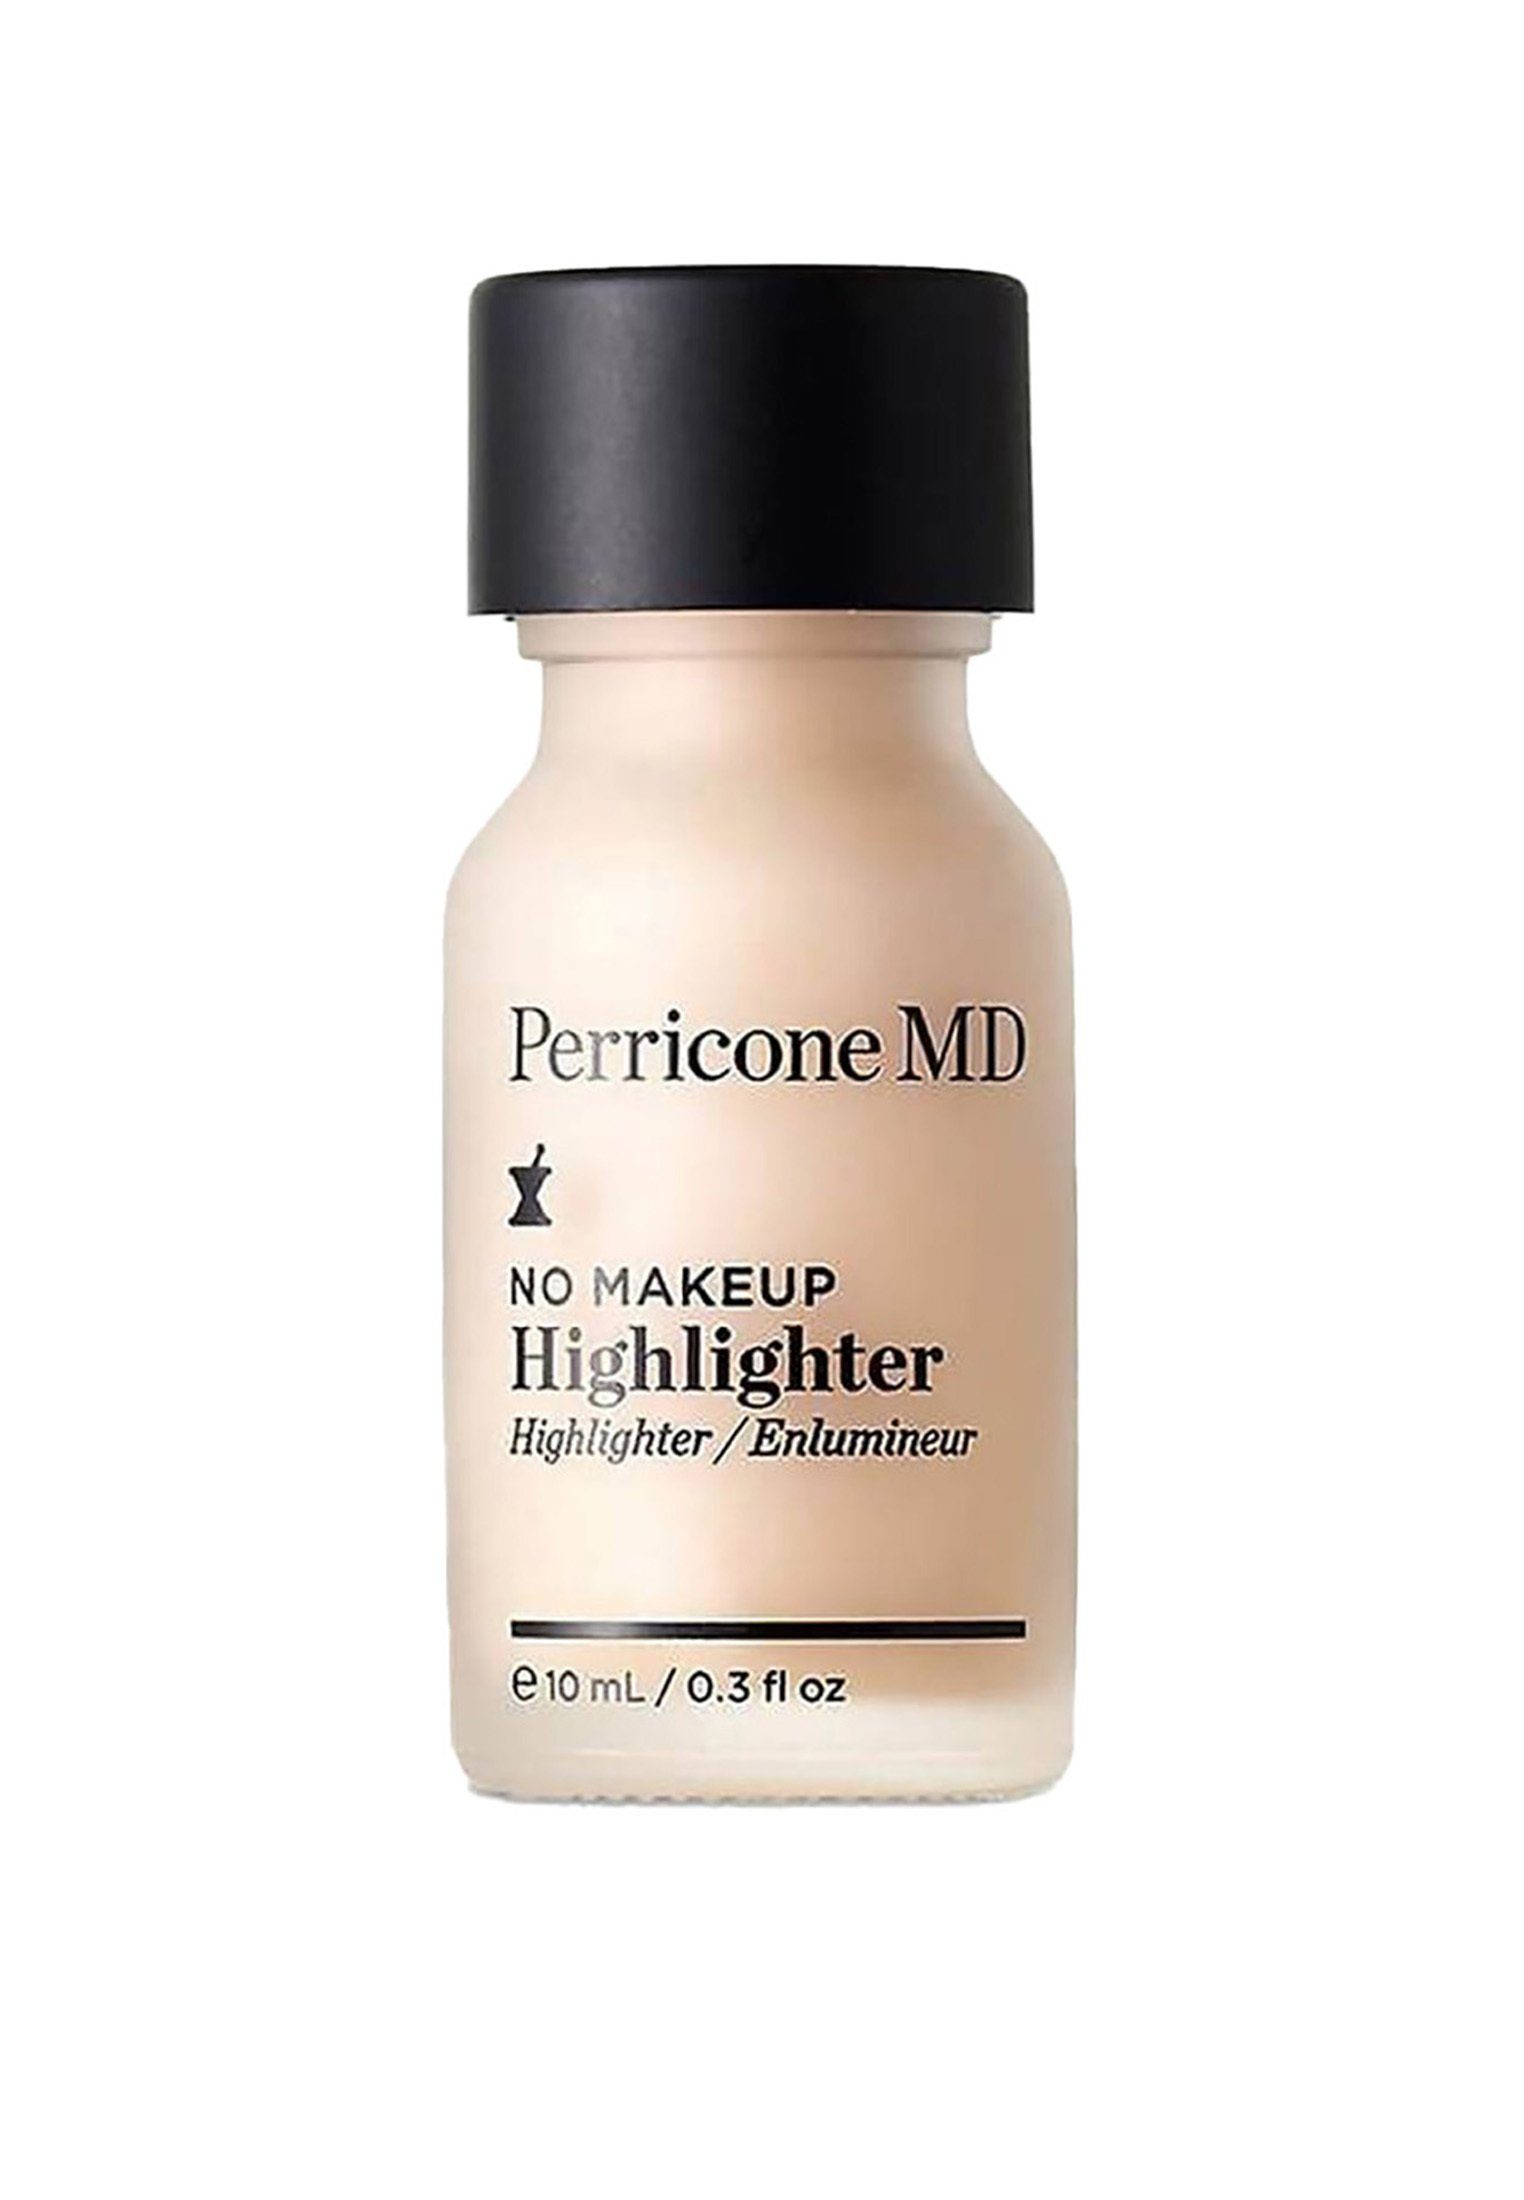 PERRICONE Highlighter Highlighter Makeup PERRICONE No Highlighter